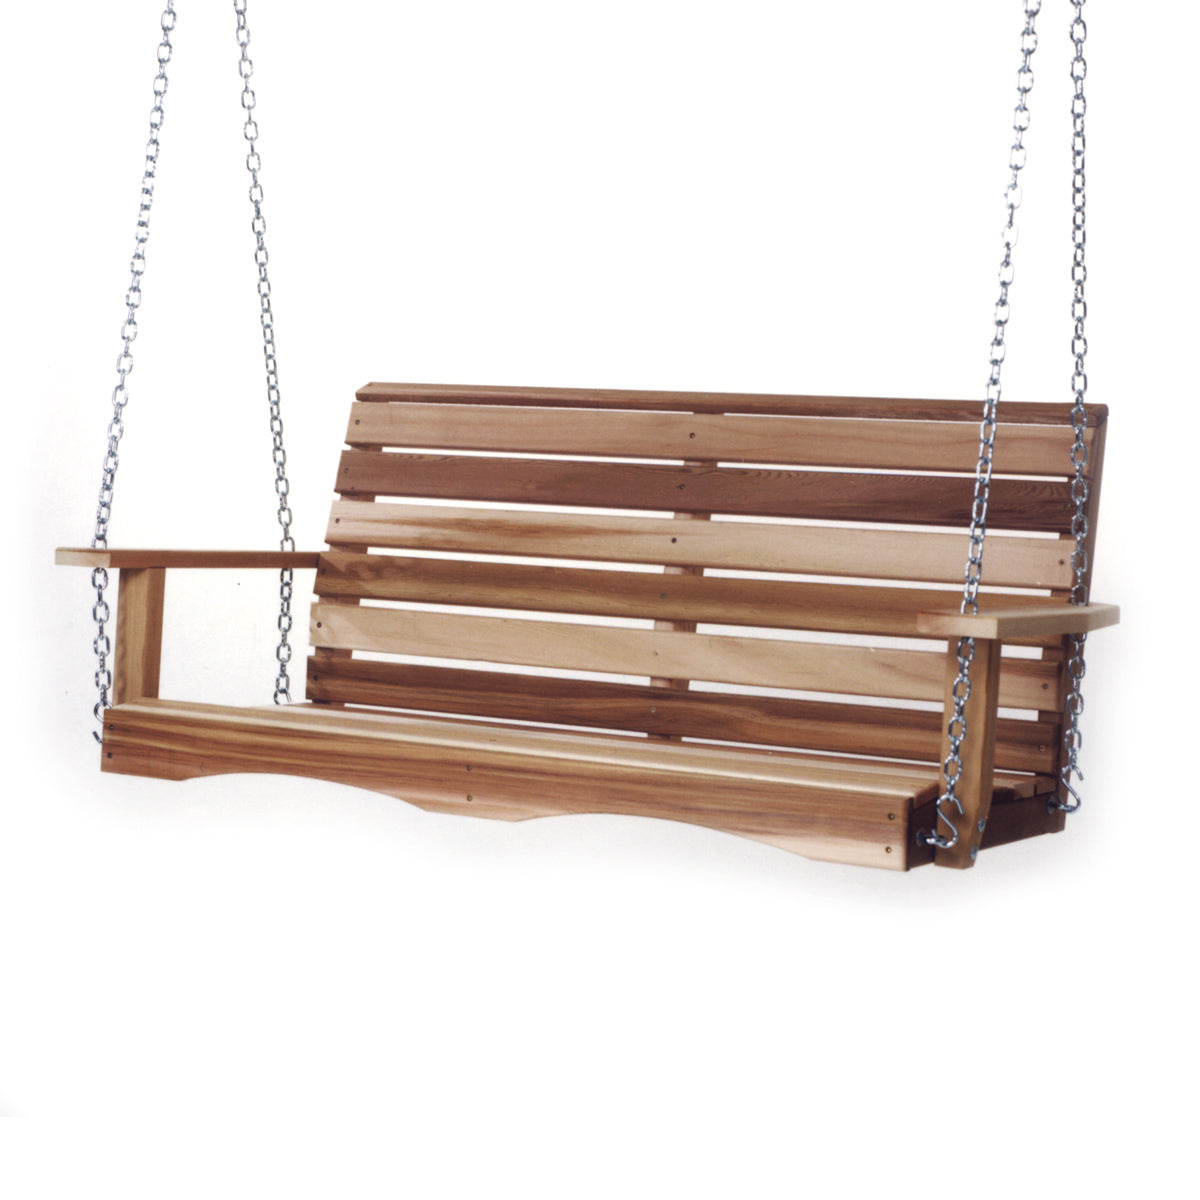 Porch Swing 4' With Comfort Springs - Swings and More